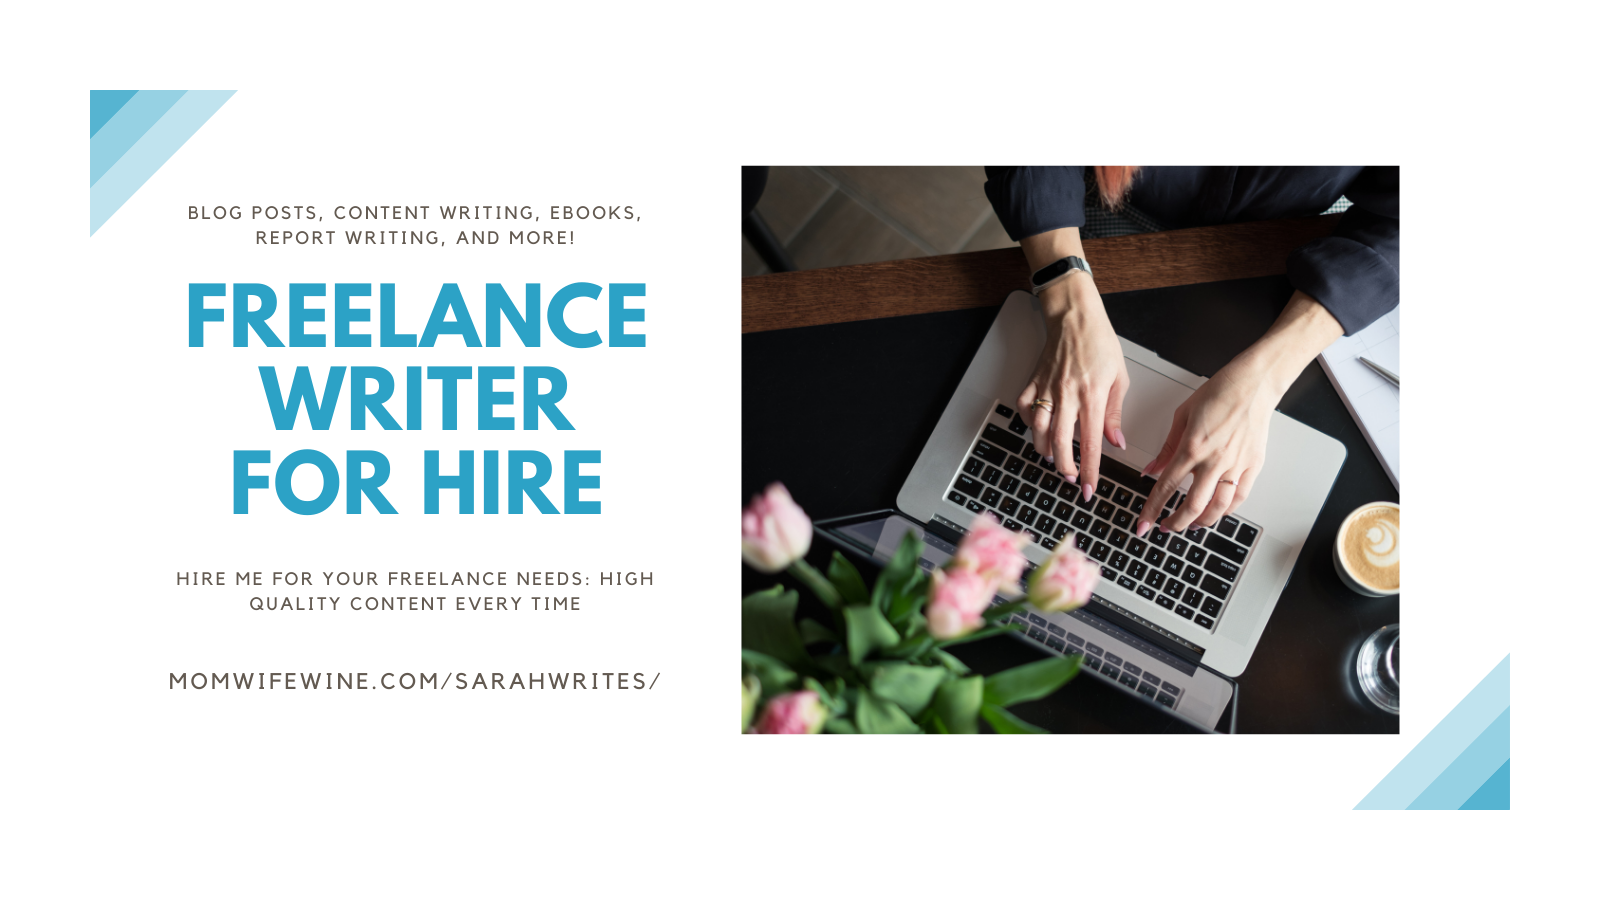 freelance writer for hire, hire a freelance writer, freelance work, freelance ebook, content writing, blog posts